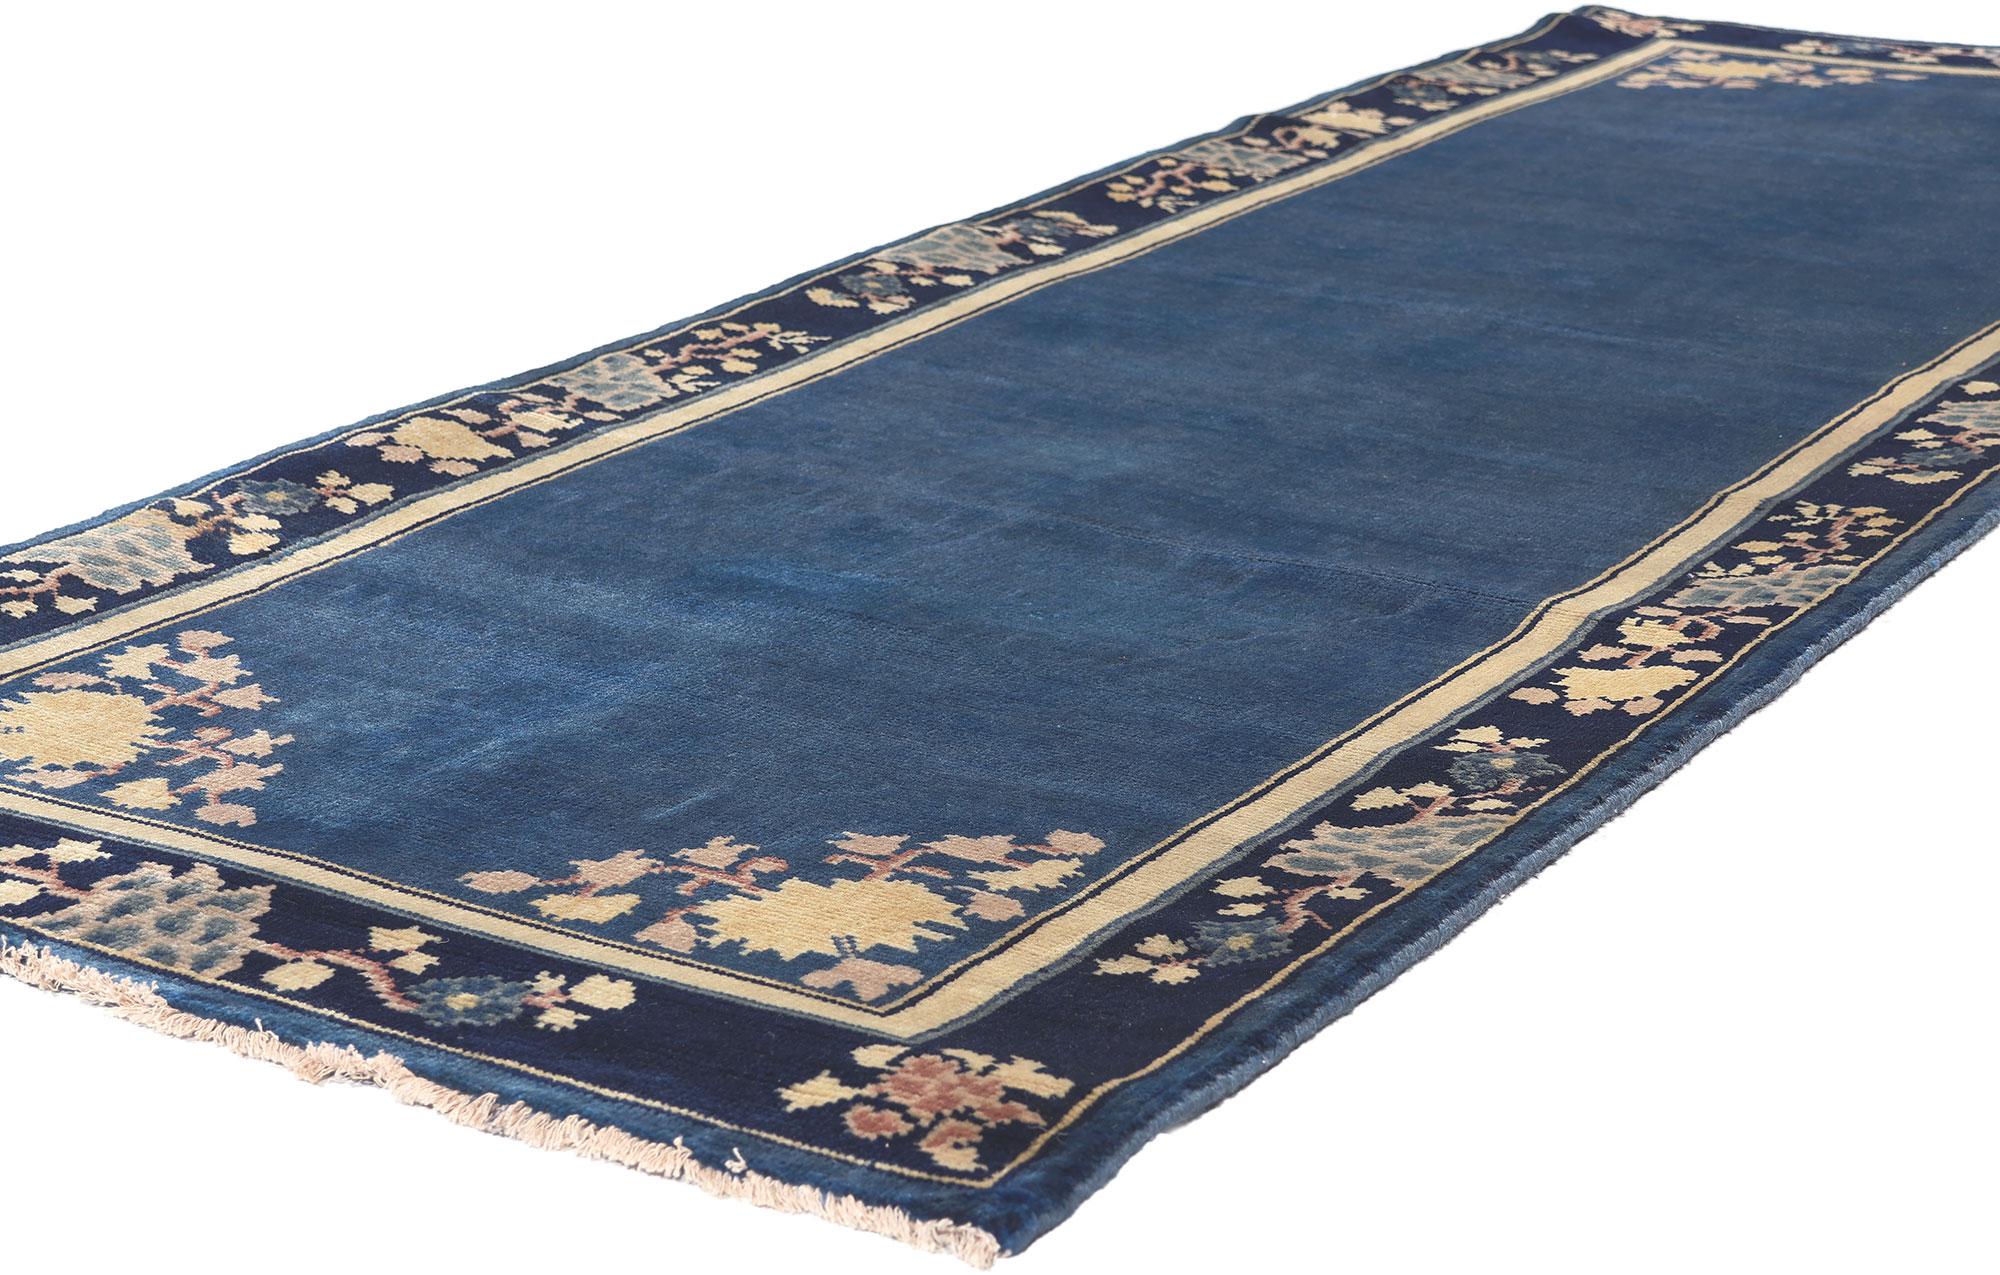 30994 Modern Chinese Art Deco Rug with Chinoiserie Chic Style, 02'08 x 07'10.

Chinoiserie Chic meets Modern Luxe in this hand knotted wool Chinese Art Deco style runner. The timeless style and lavish texture woven into this piece work together